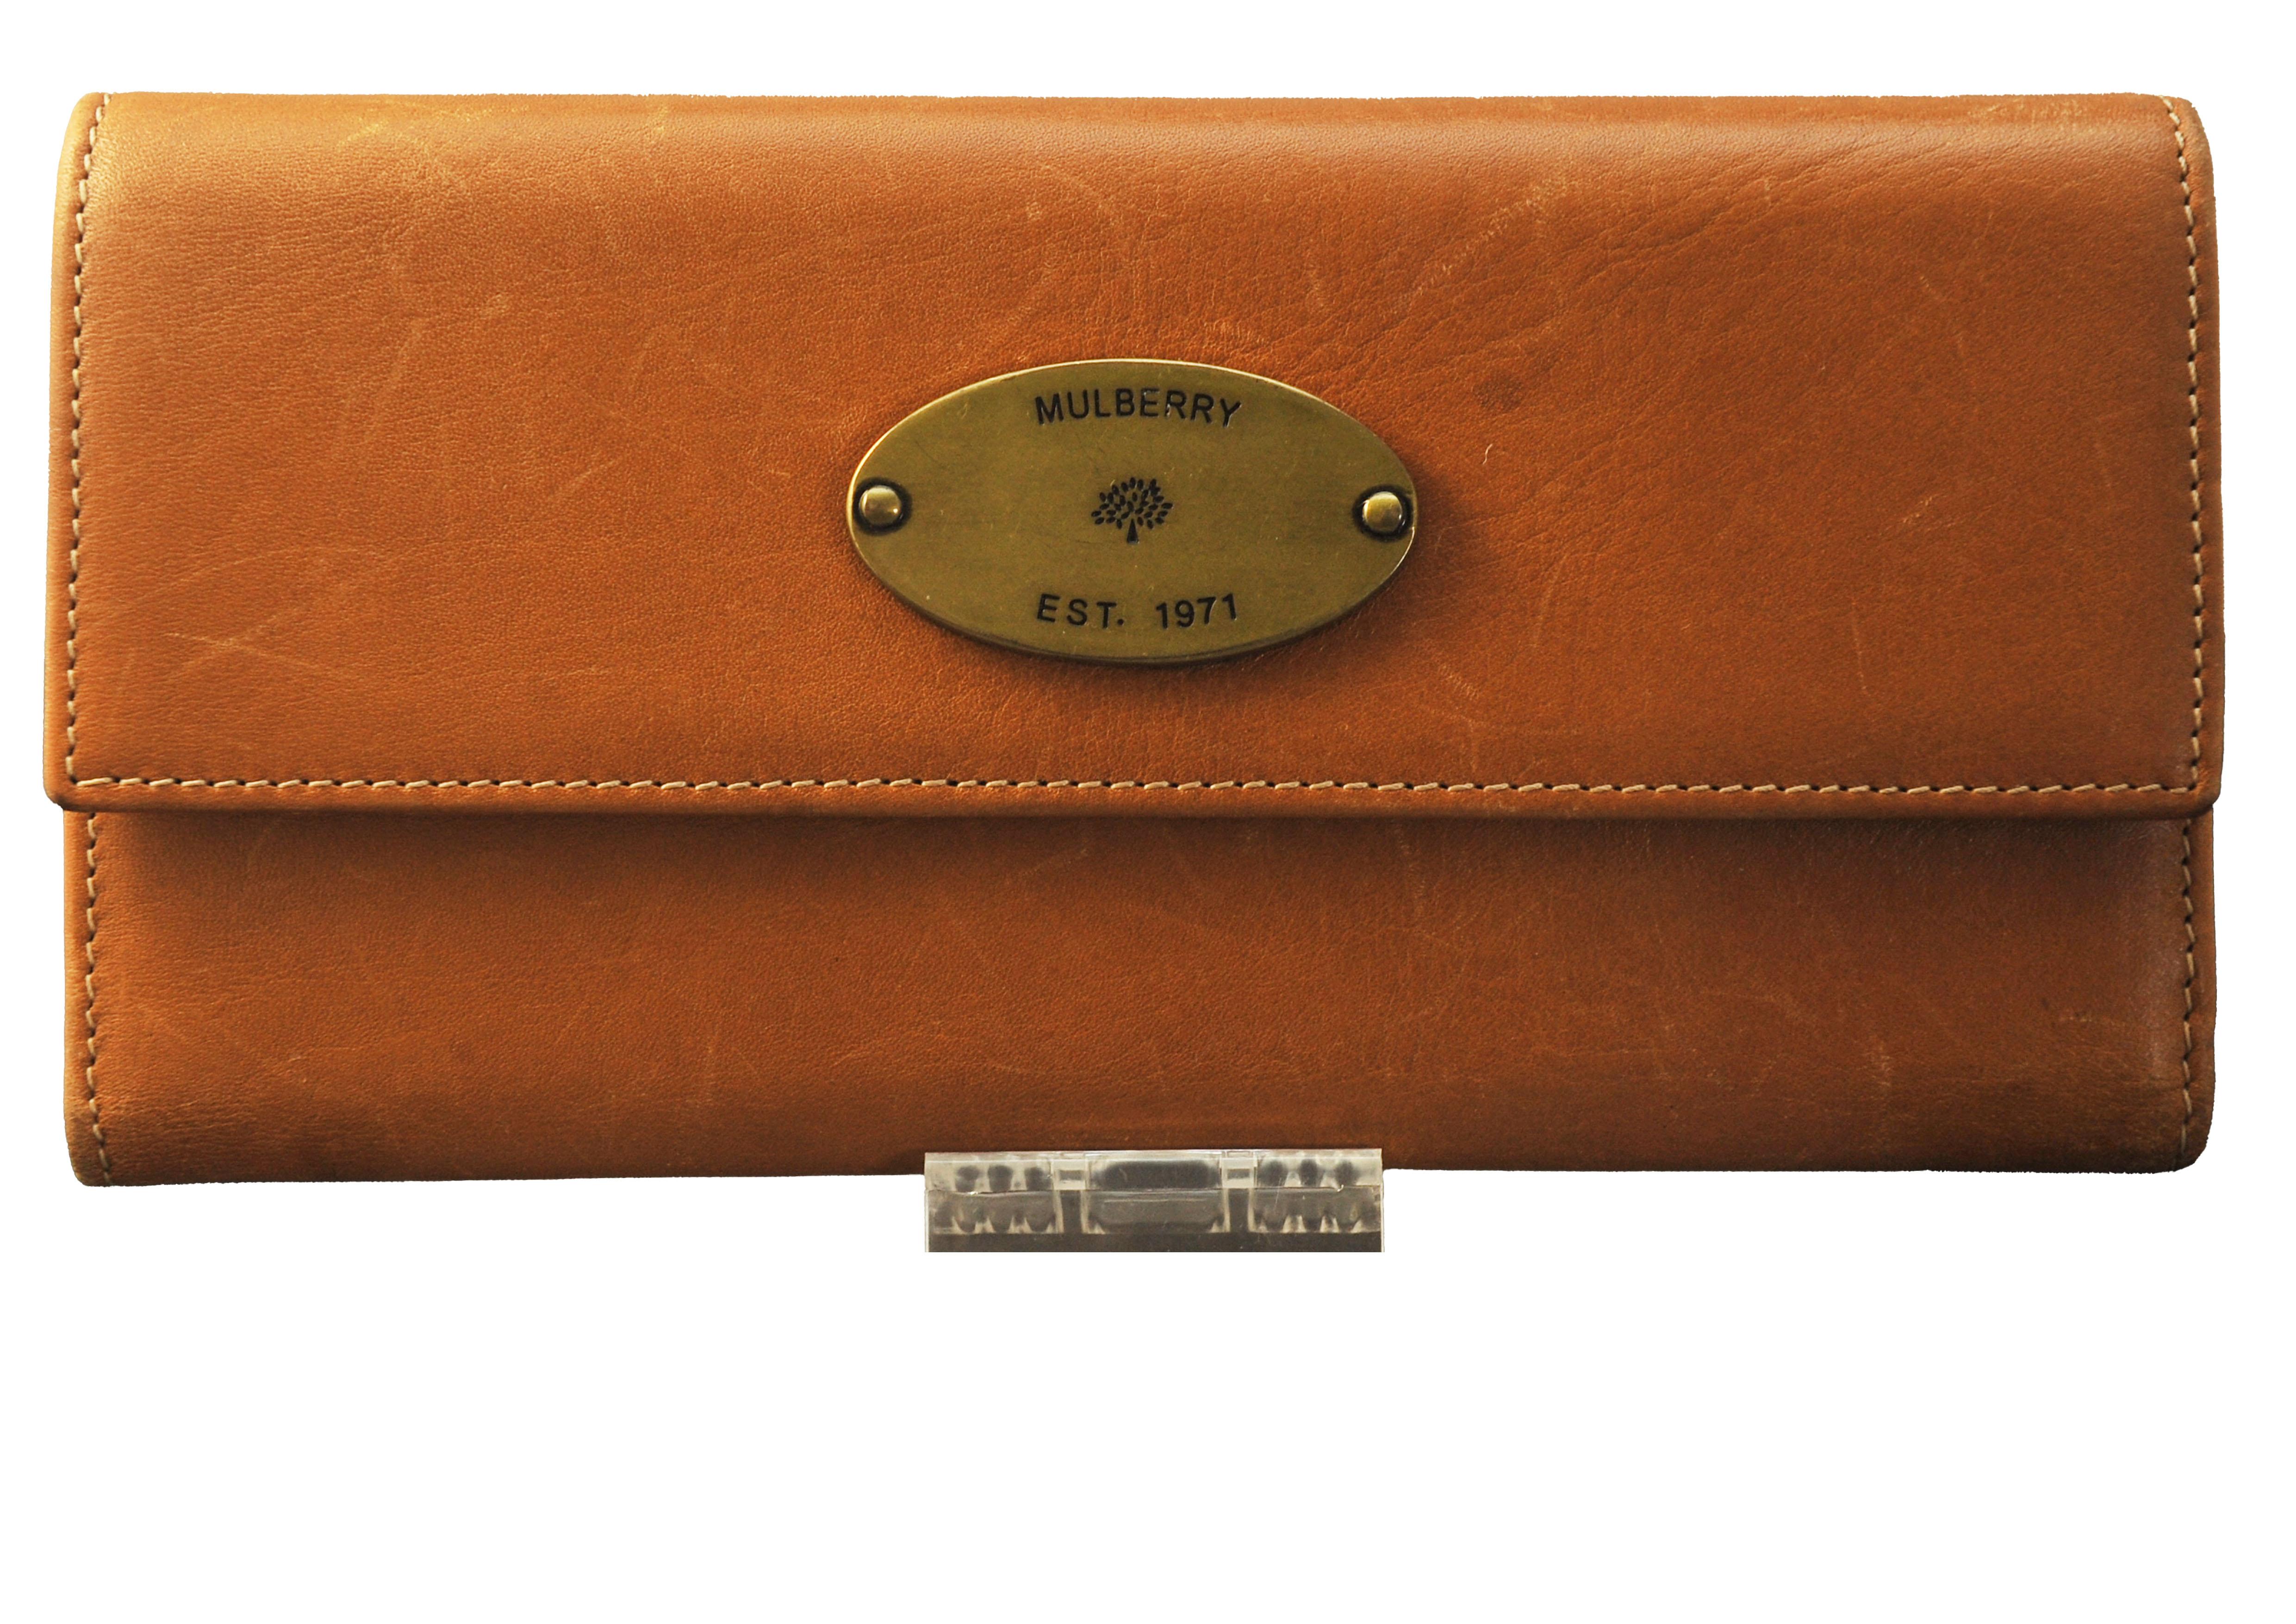 A Ladies Mulberry Tan Datwin Leather Wallet with Original Dust Cover & Grey Cardboard Gift Box.

The company was founded in 1971 by Roger Saul and his mother, Joan. In 1973, they opened a factory in Chilcompton, Somerset, England. The area was